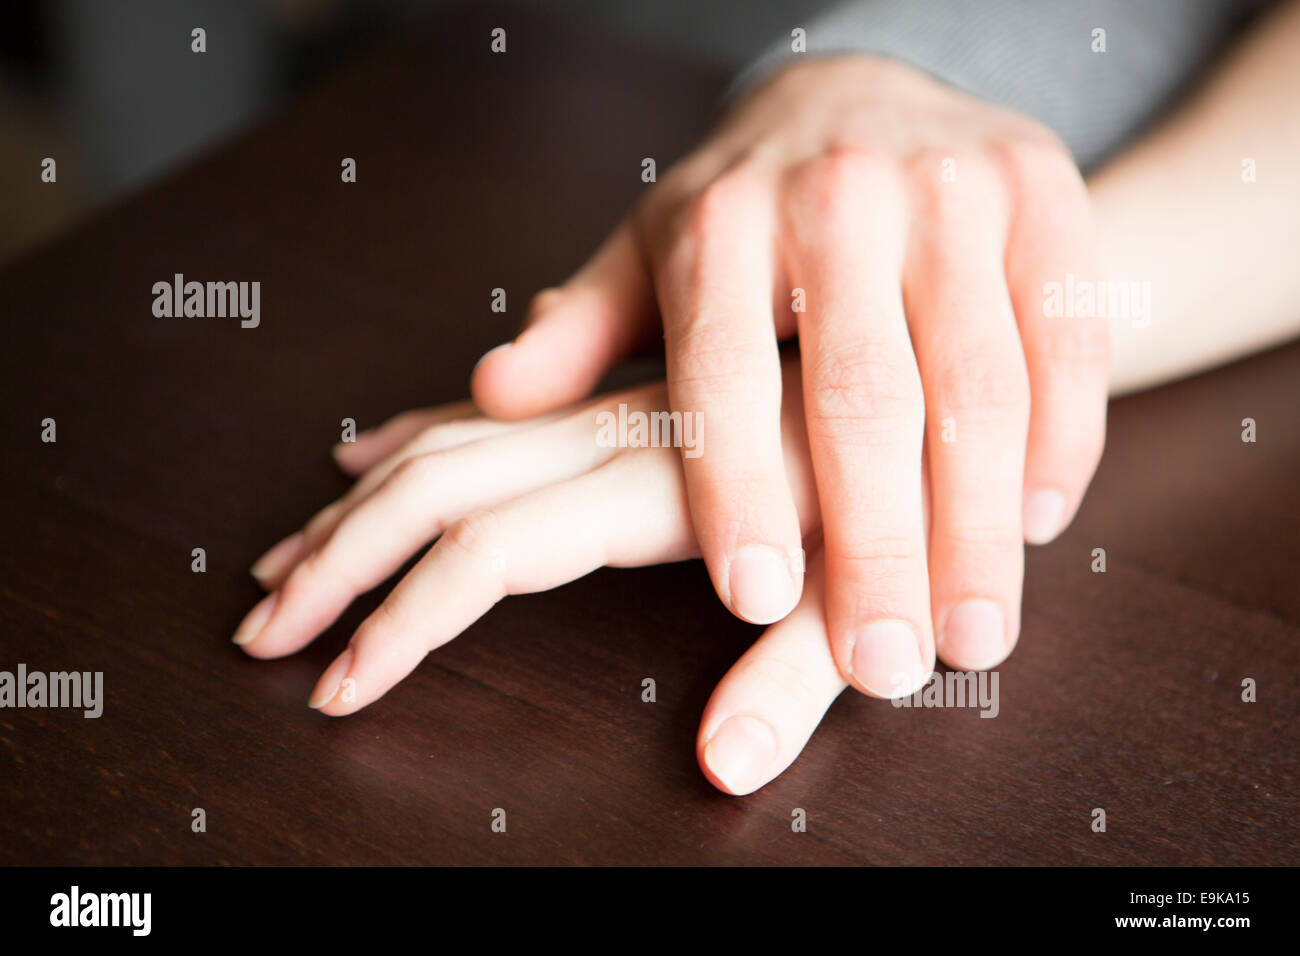 Couple aimant's hands on table Banque D'Images